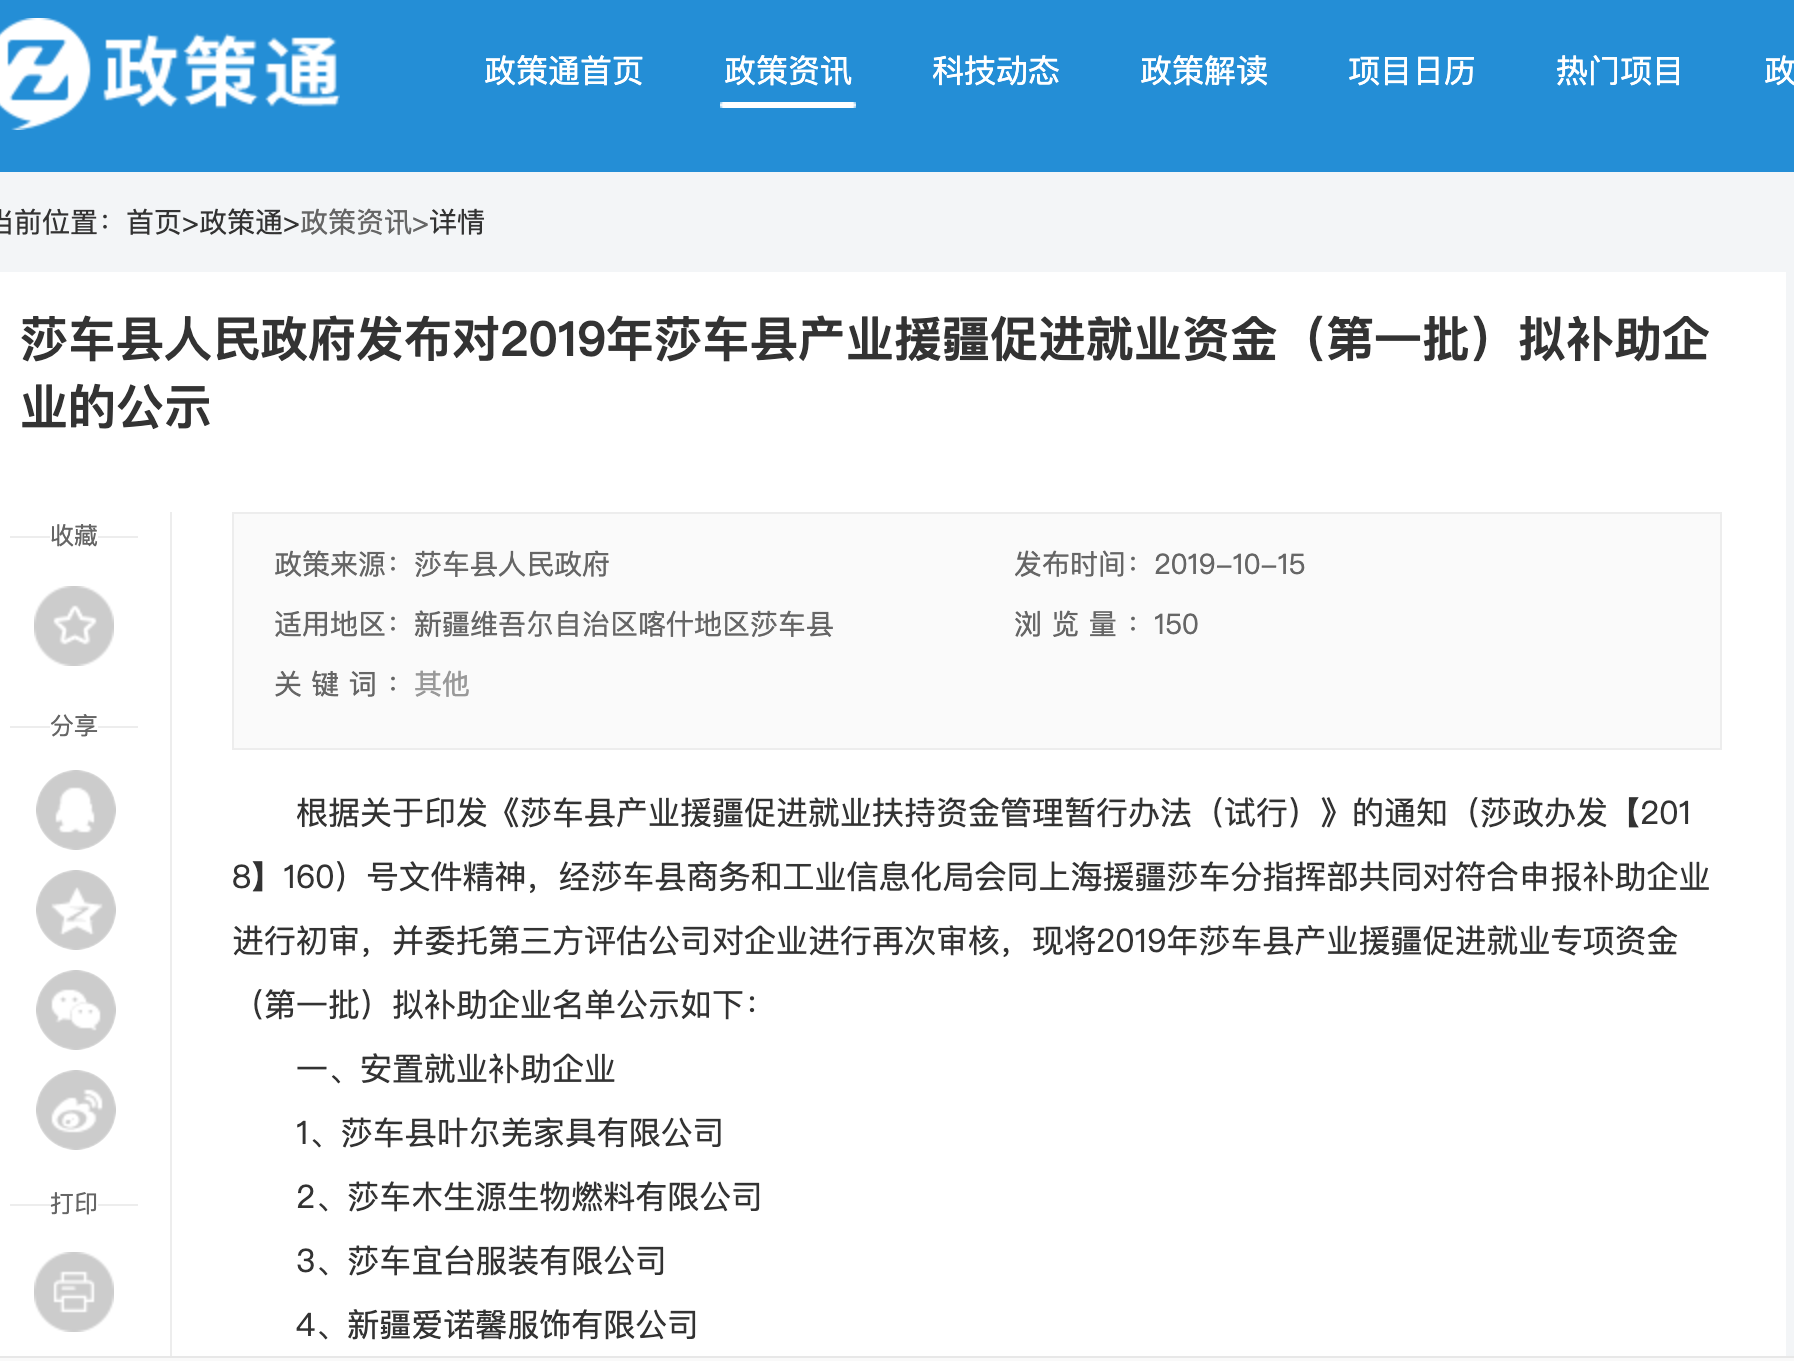 Screenshot of a list of companies participating in Xinjiang Aid